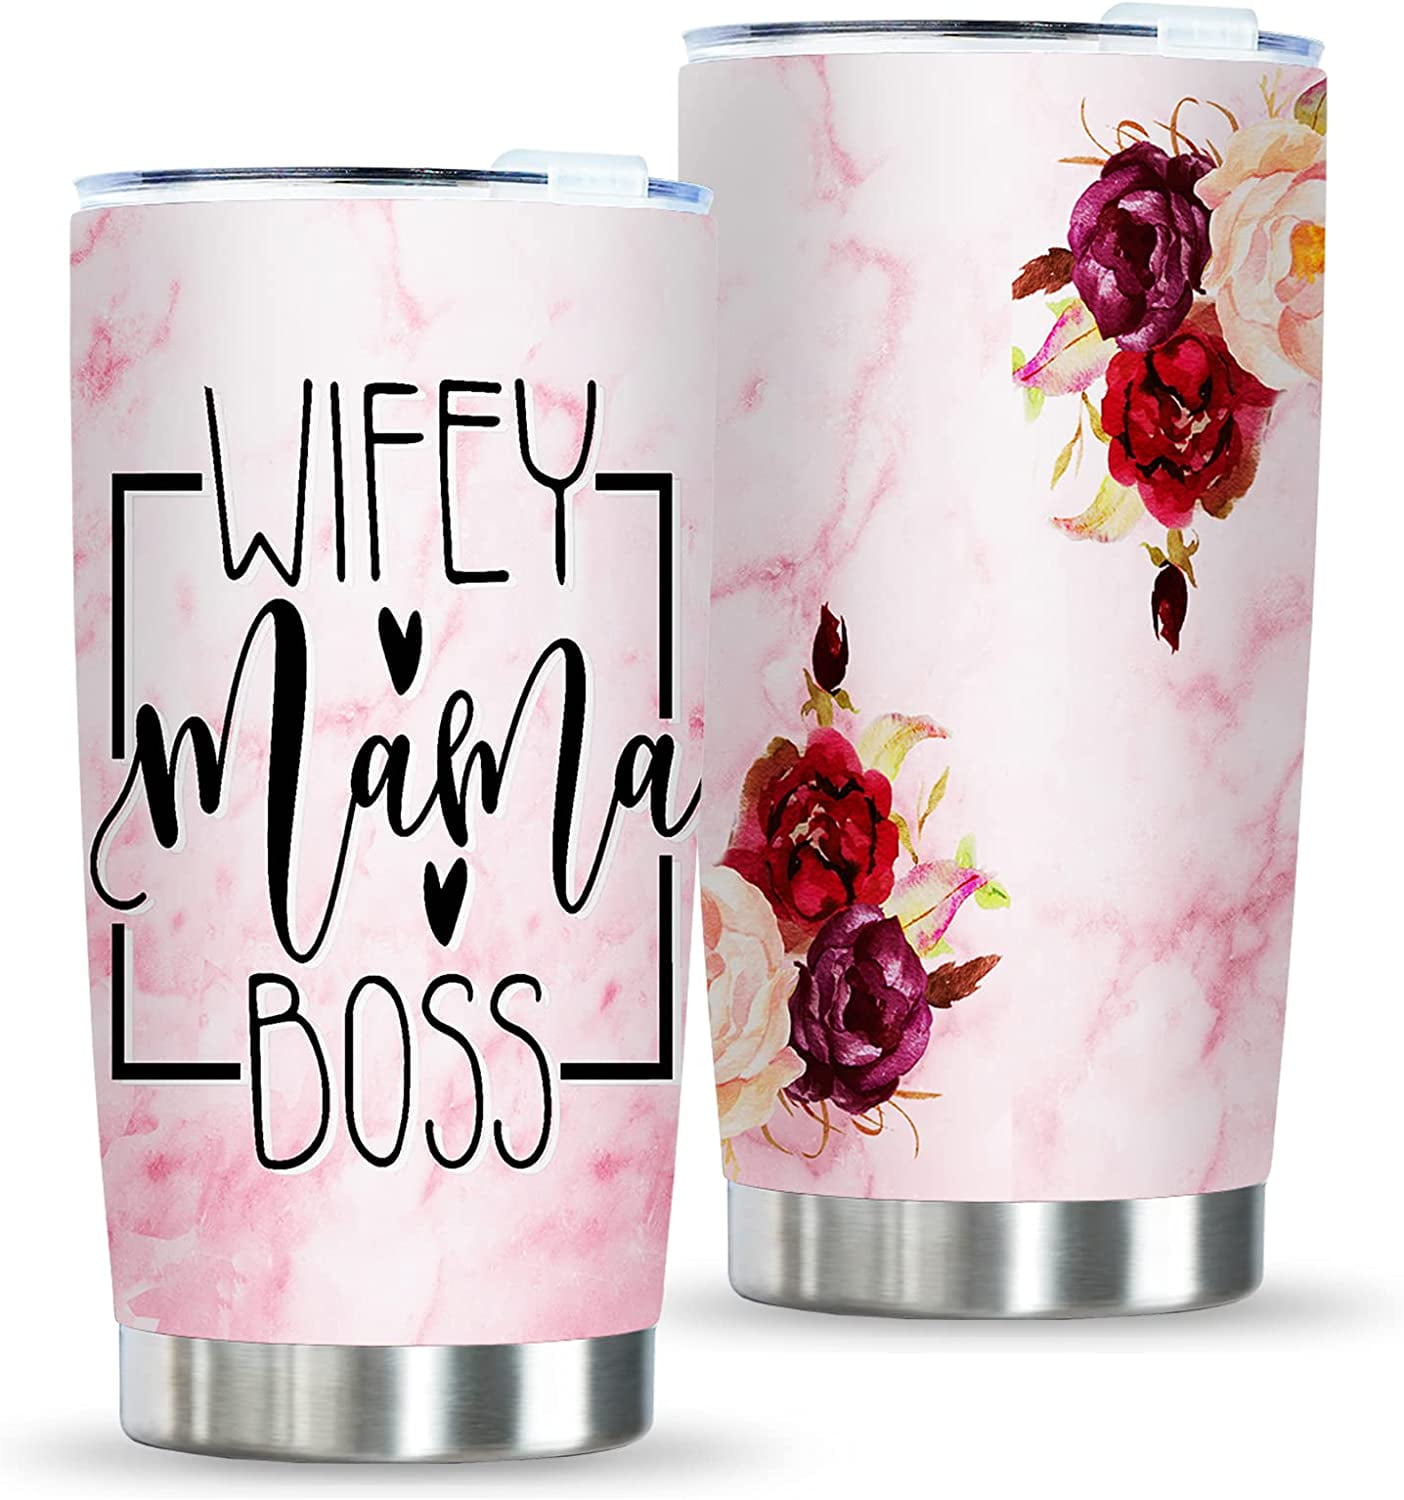 Yuqghpae Bride To Be Gifts, Bride Tumbler, Newly Wed Gifts for The Couple,  Gifts for Fiancee, Insula…See more Yuqghpae Bride To Be Gifts, Bride